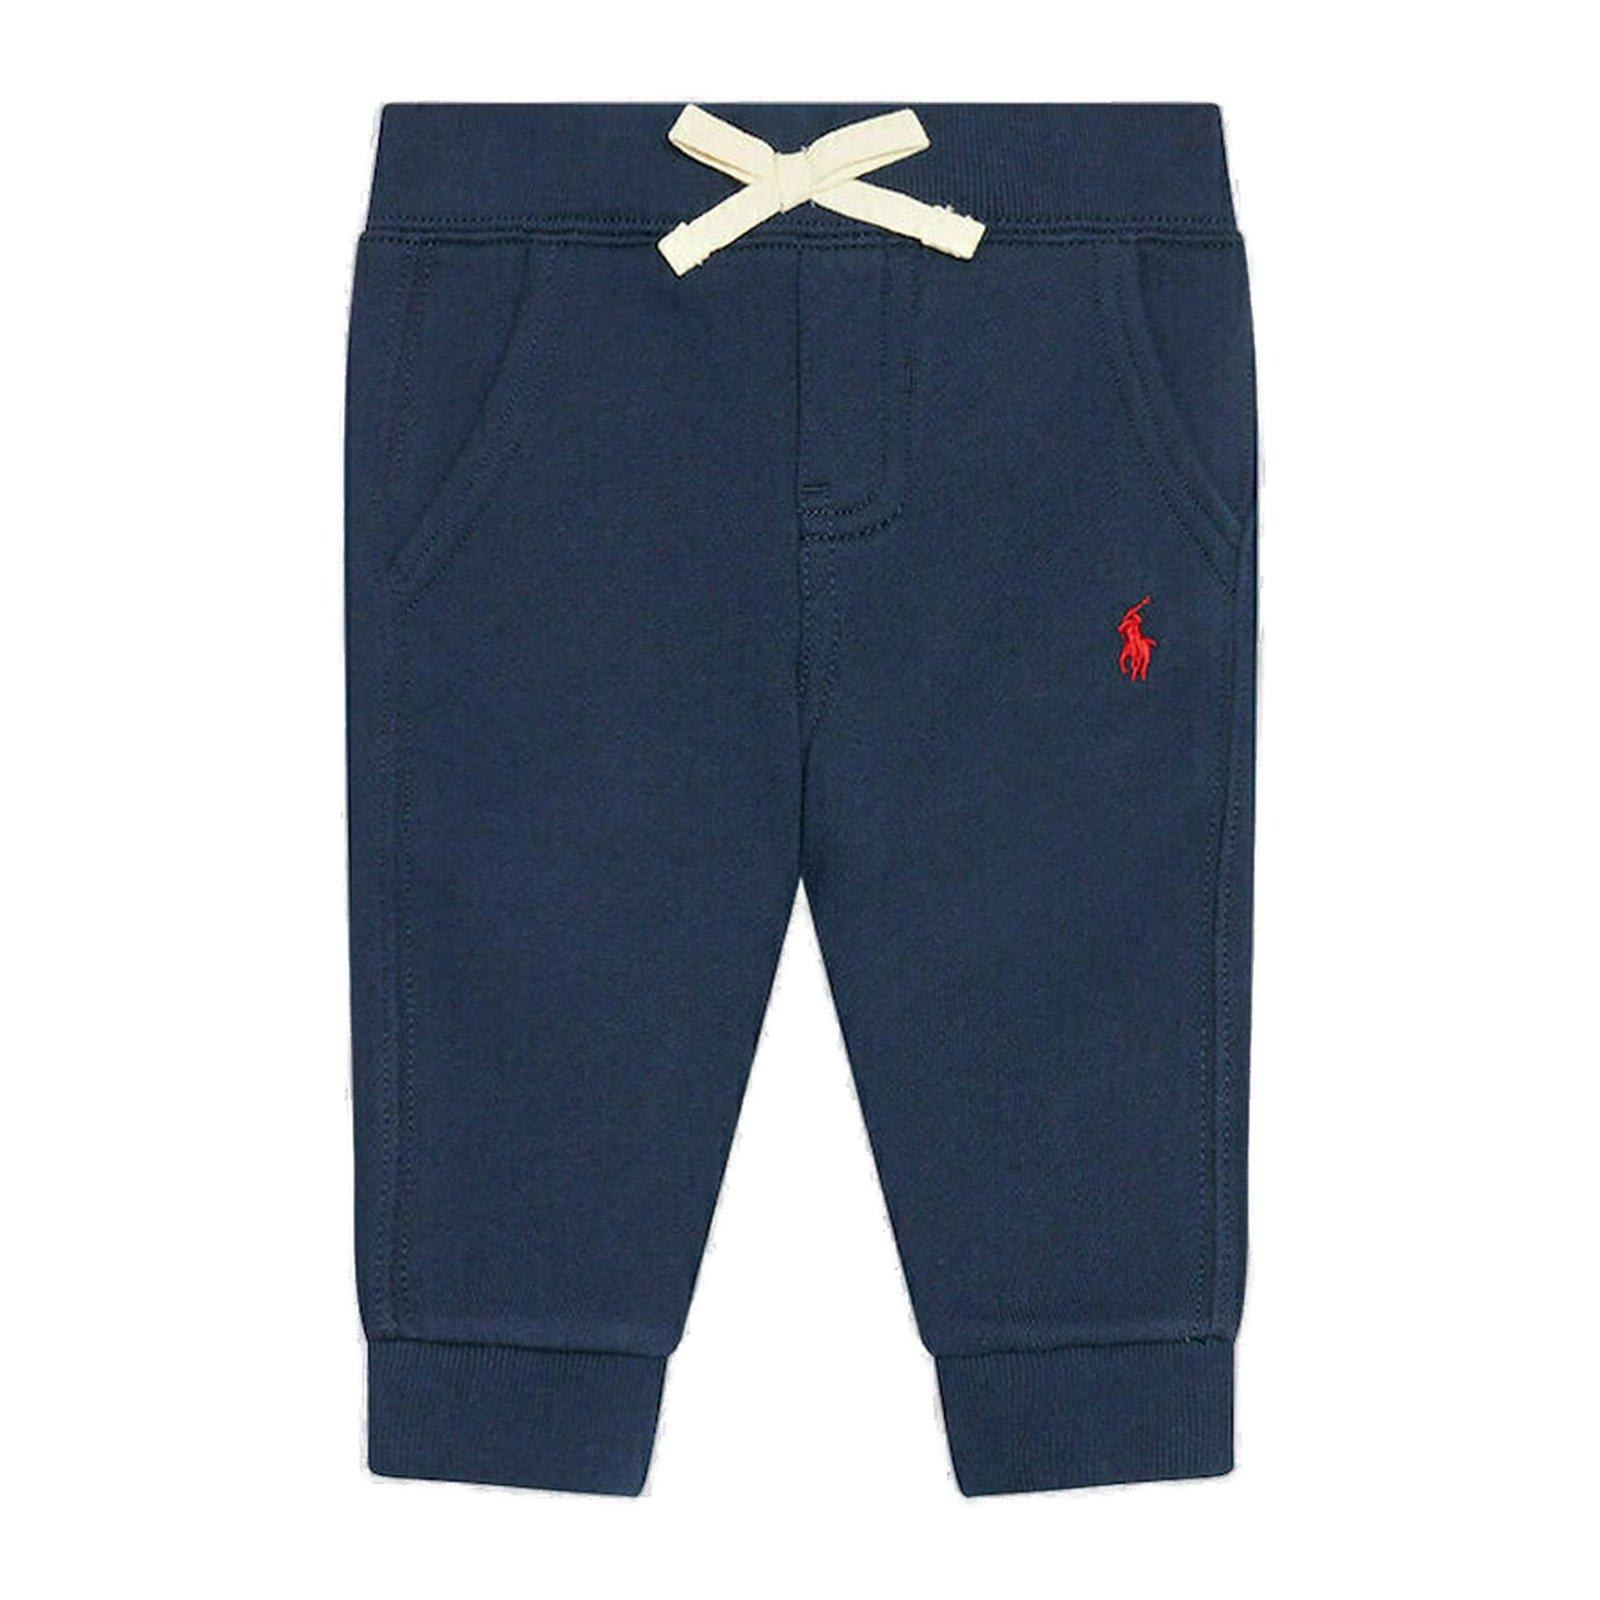 RALPH LAUREN LOGO EMBROIDERED DRAWSTRING TROUSERS